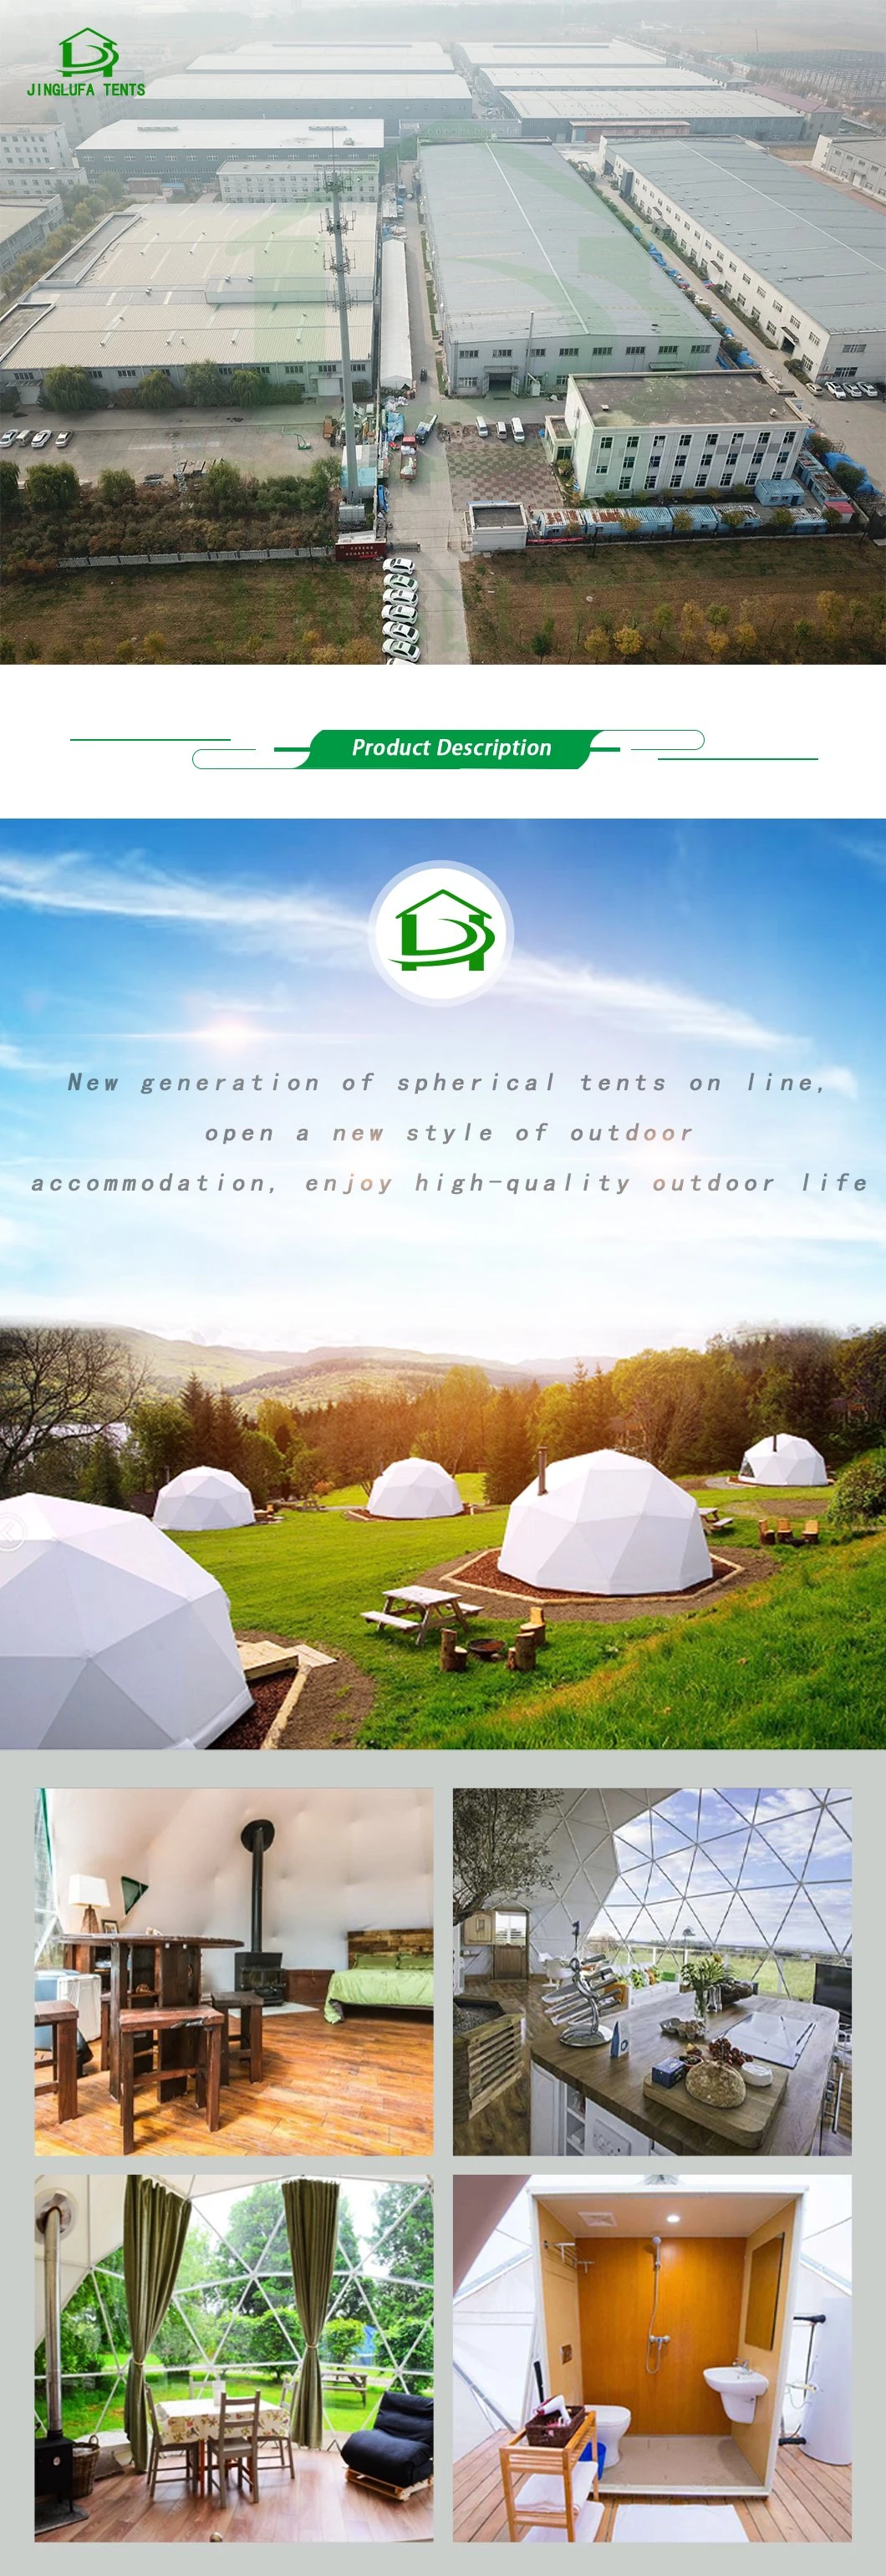 Large Luxury Geodetic Dome Glamping Tent